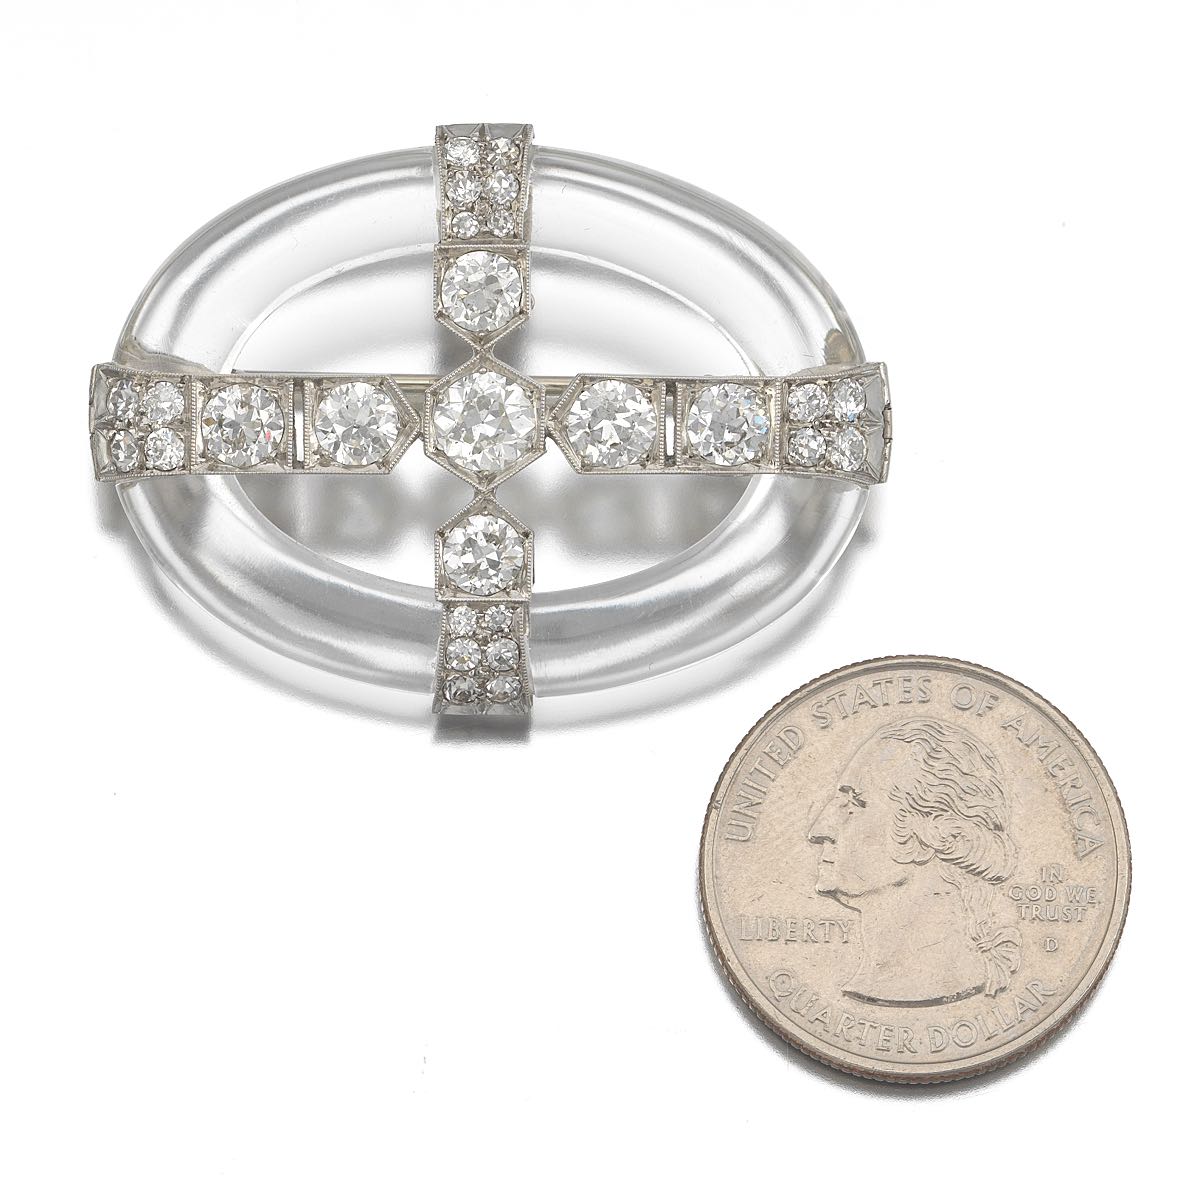 Diamond, Platinum and Rock Crystal Brooch  1-3/4 x 1-1/8 in. Oval shape brooch comprised of carved - Image 4 of 4